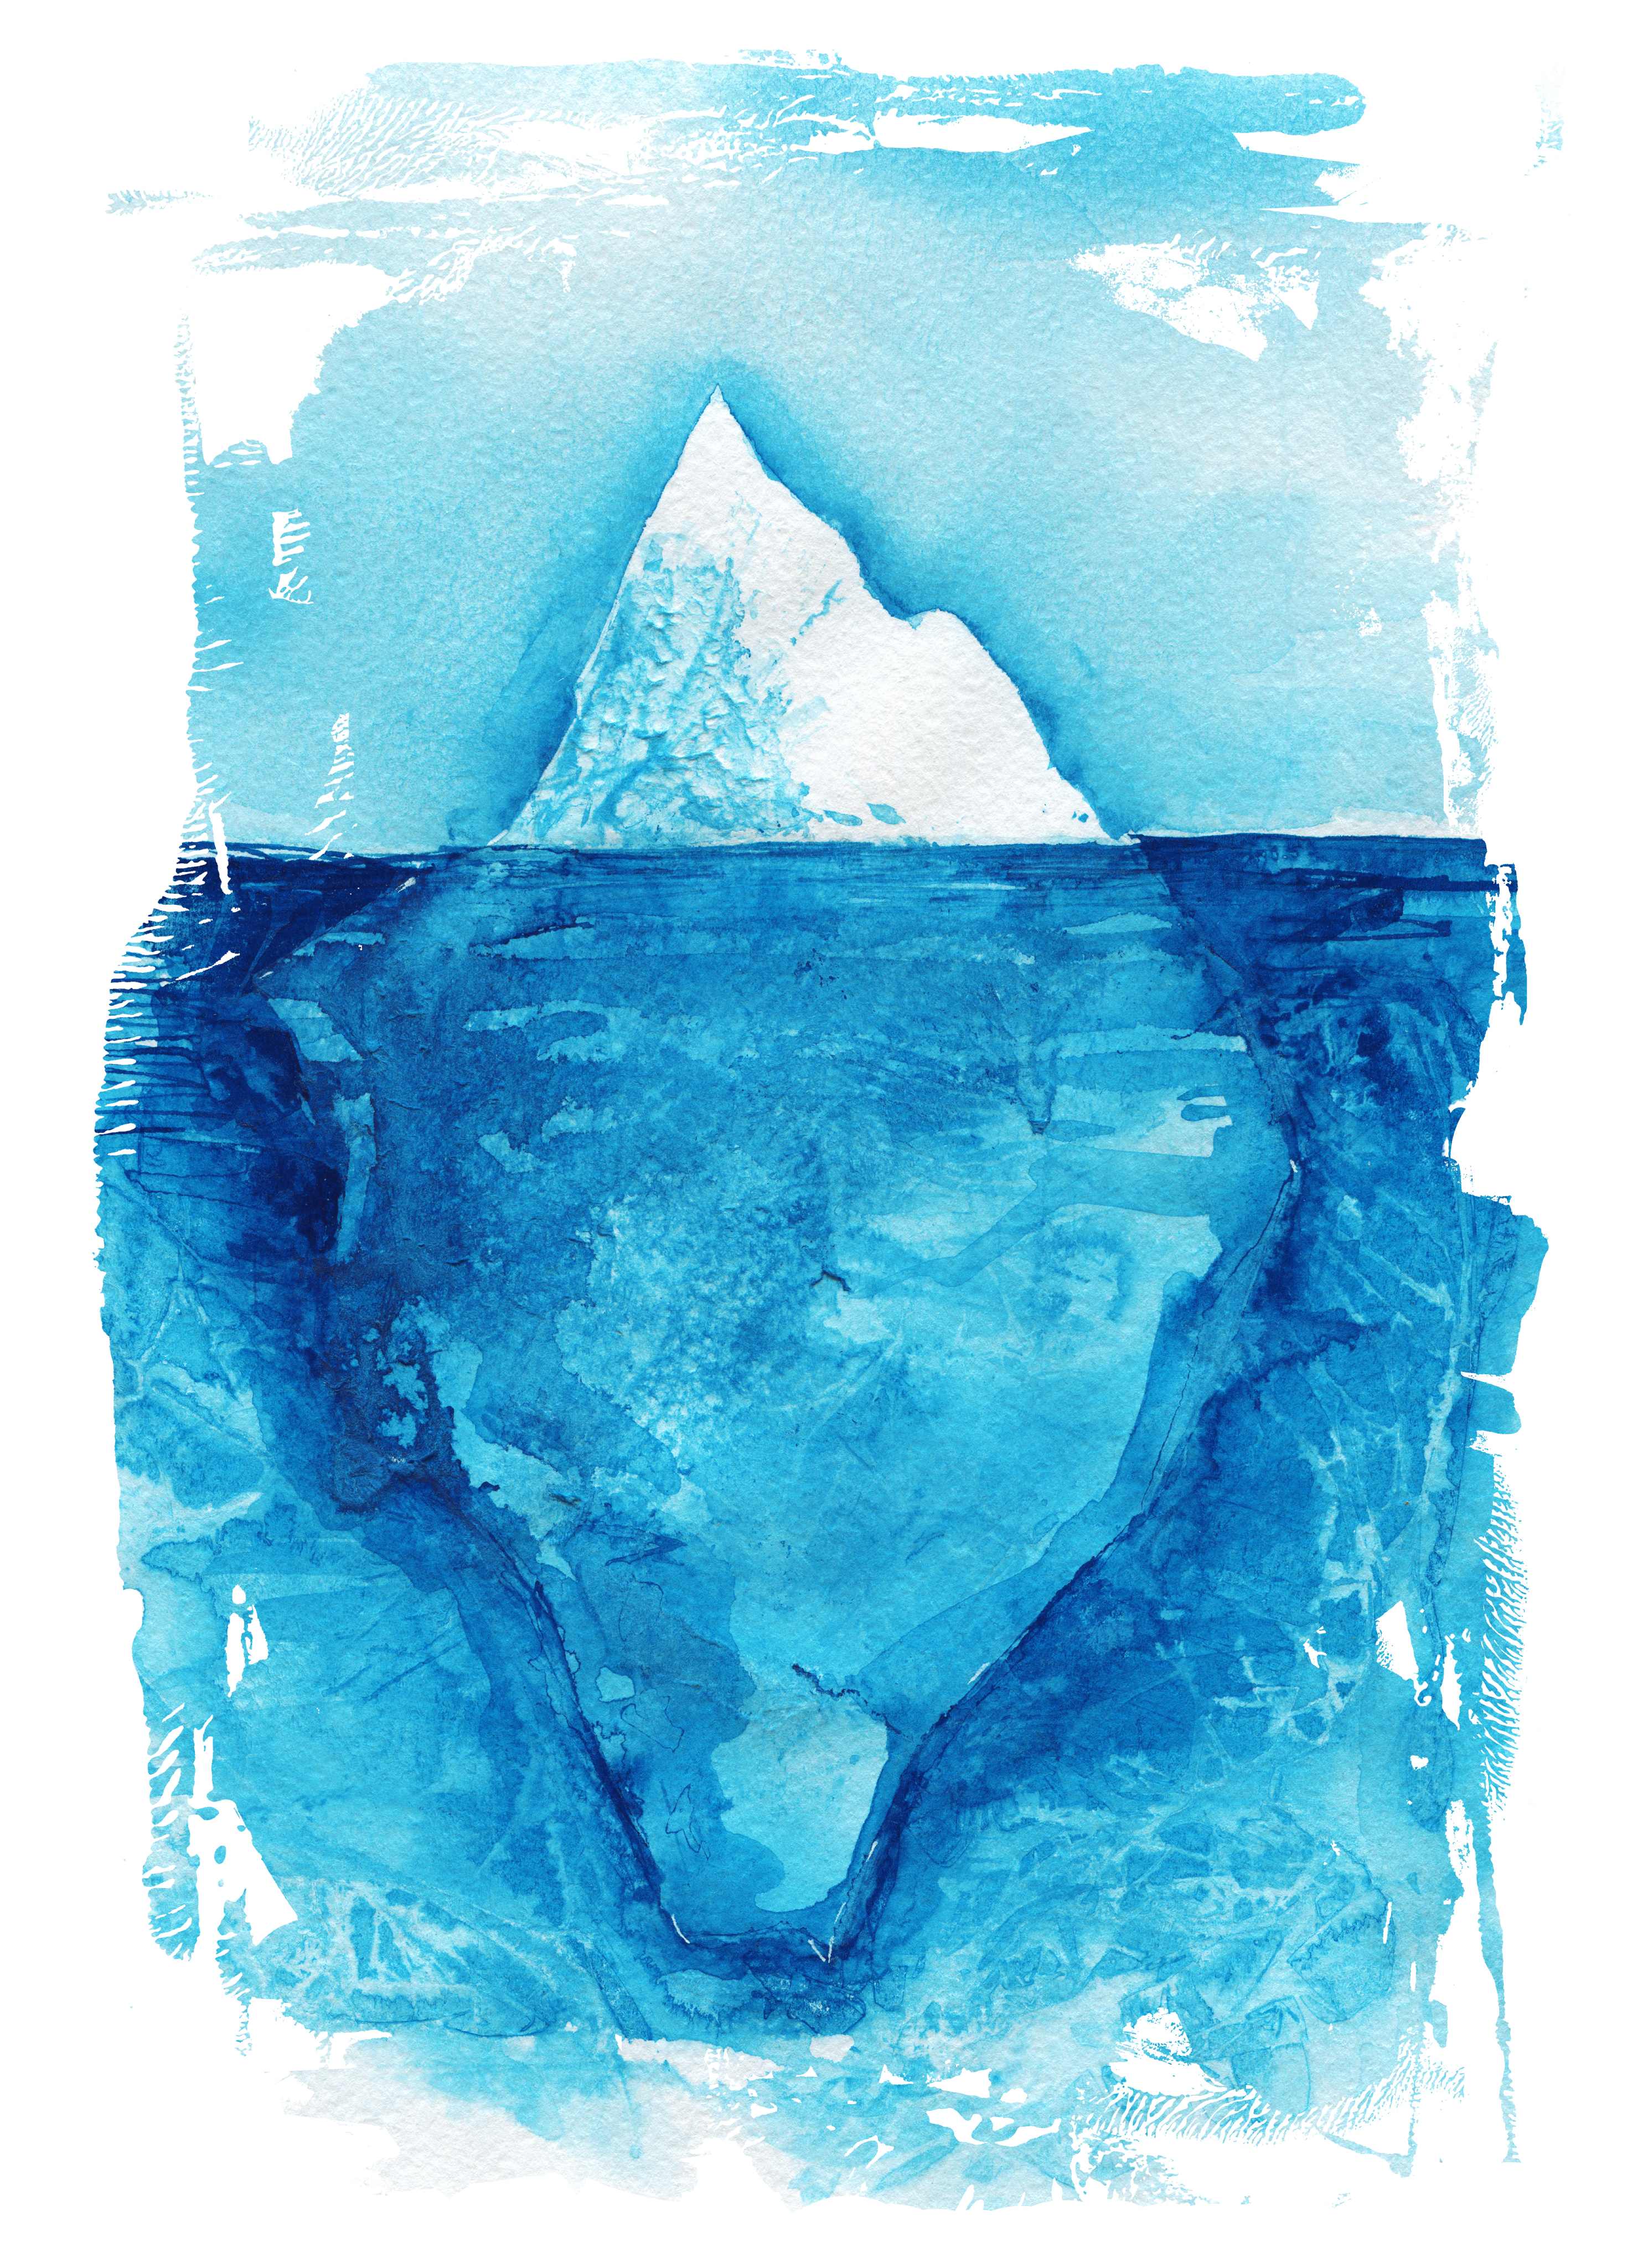 Watercolour image of an iceberg above and below water. 